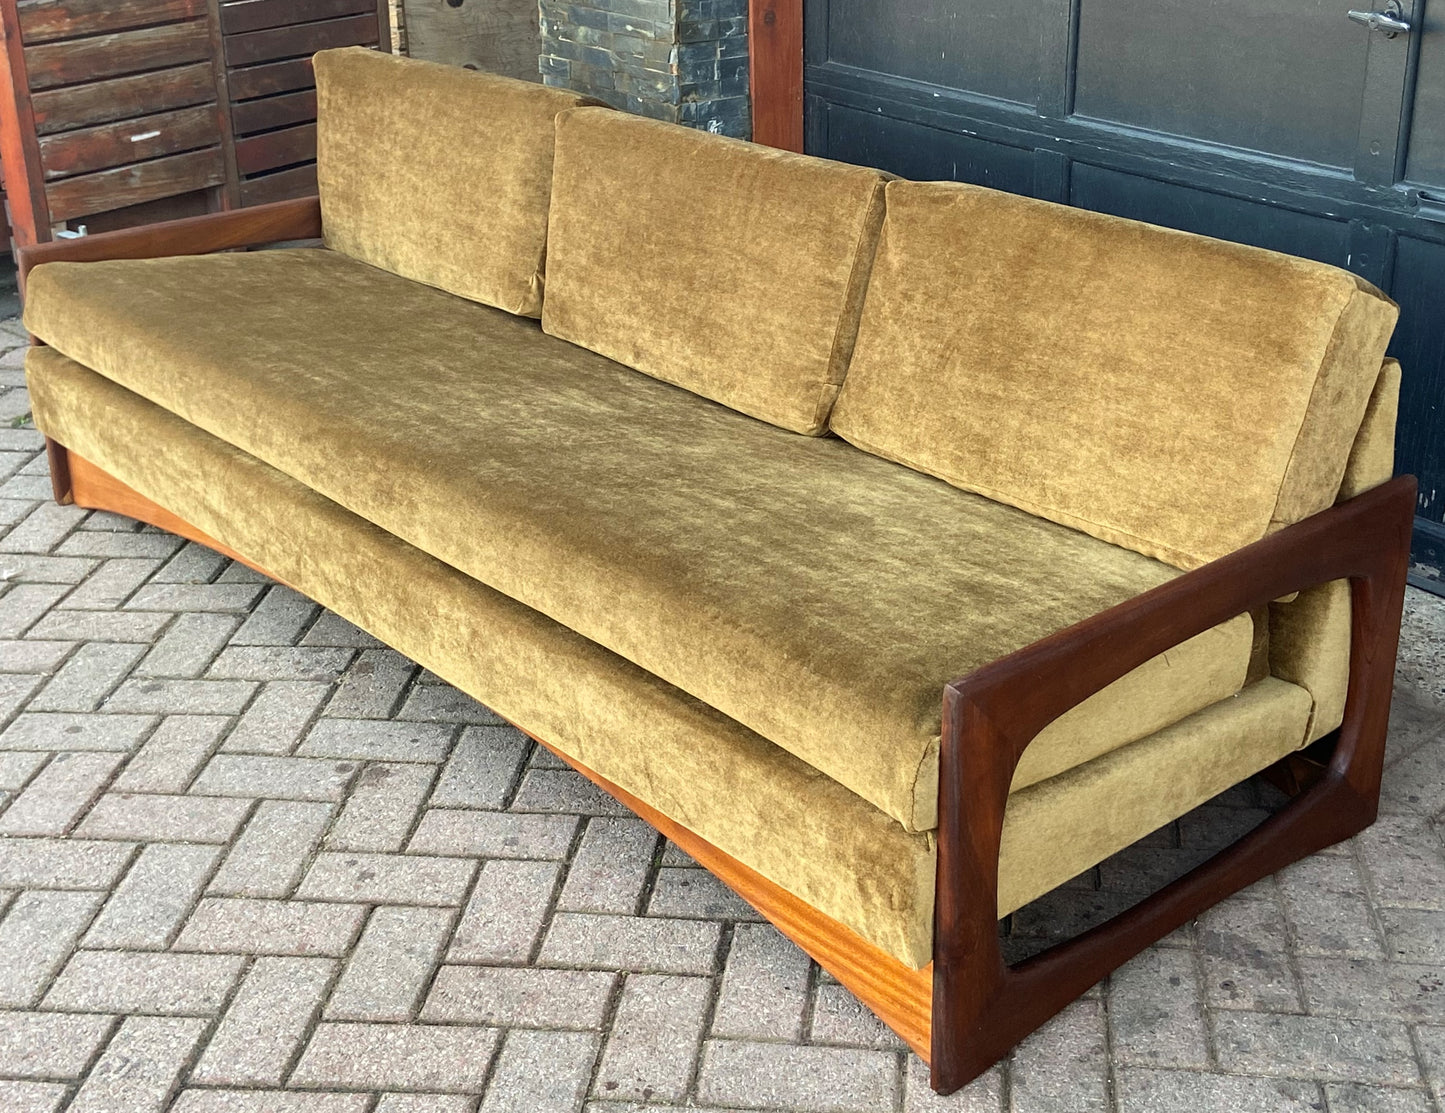 REFINISHED REUPHOLSTERED MCM Teak 4-Seater Sofa & Armchair in Wool Mohair - PERFECT